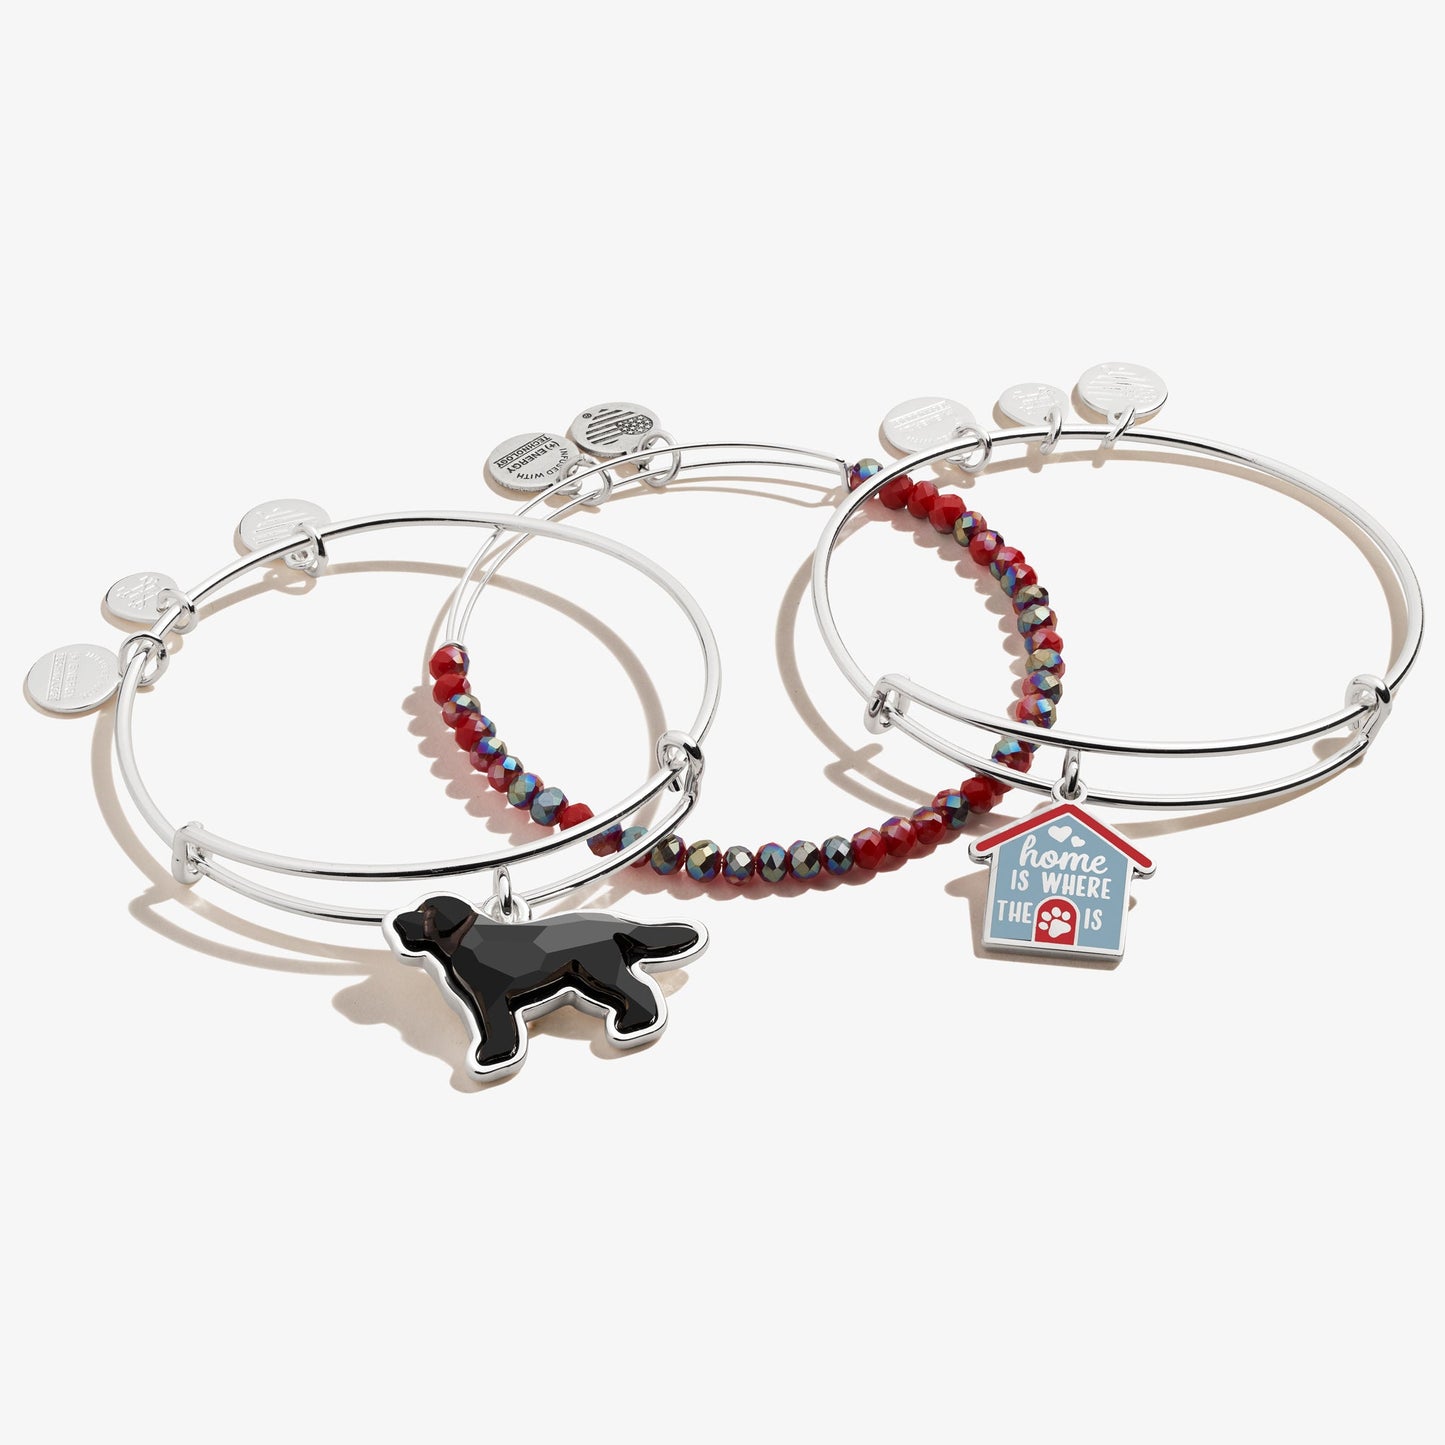 'Home is Where the Paw is' Doghouse Charm Bangles, Set of 3